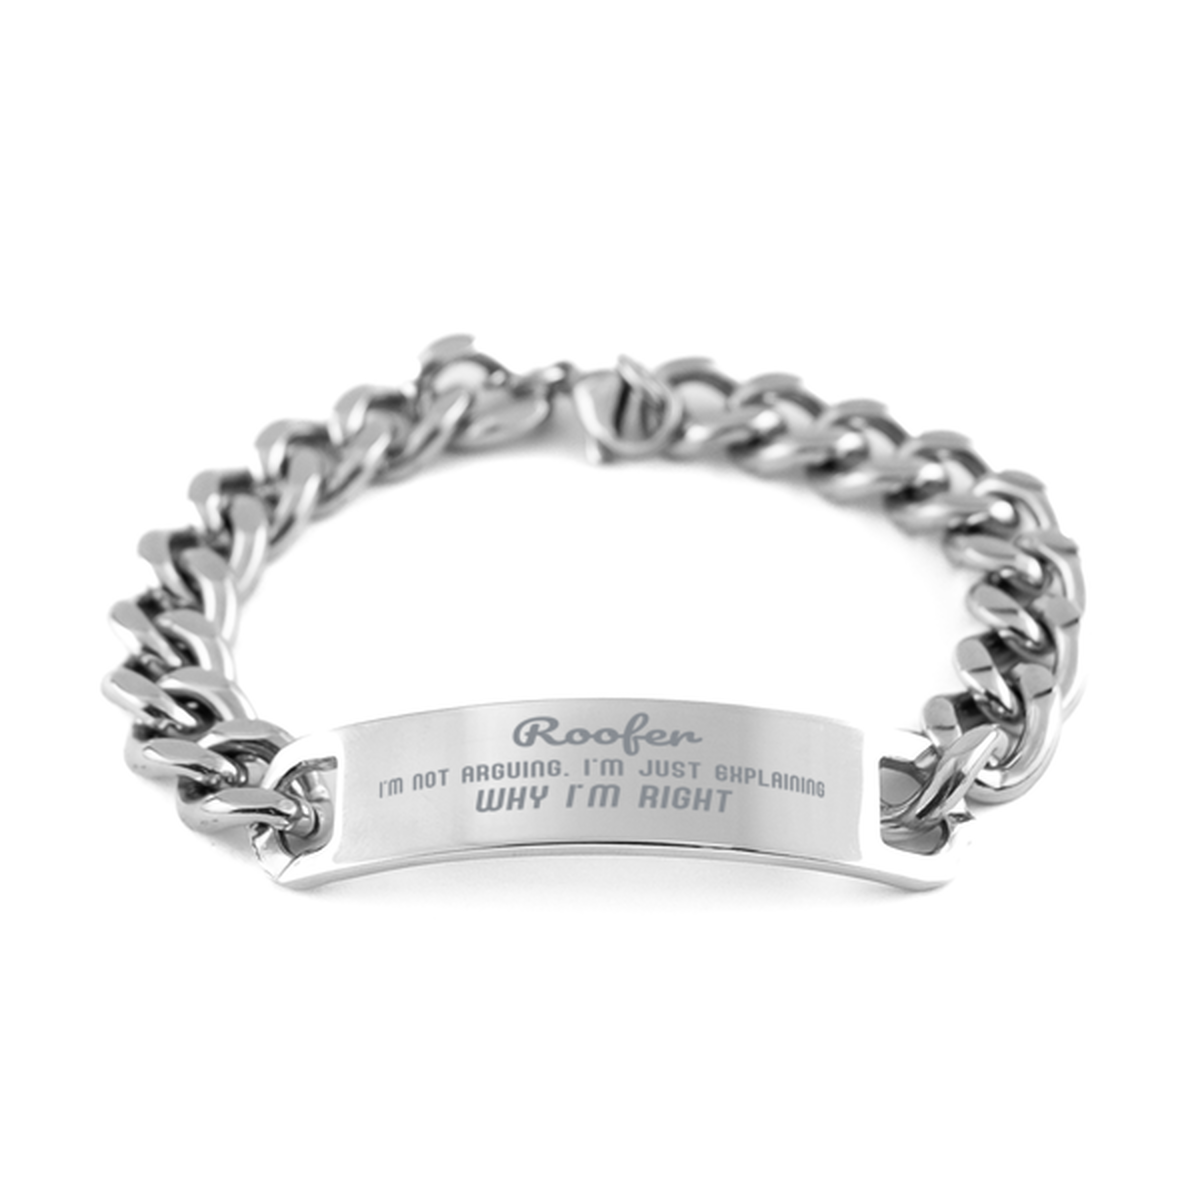 Roofer I'm not Arguing. I'm Just Explaining Why I'm RIGHT Cuban Chain Stainless Steel Bracelet, Graduation Birthday Christmas Roofer Gifts For Roofer Funny Saying Quote Present for Men Women Coworker